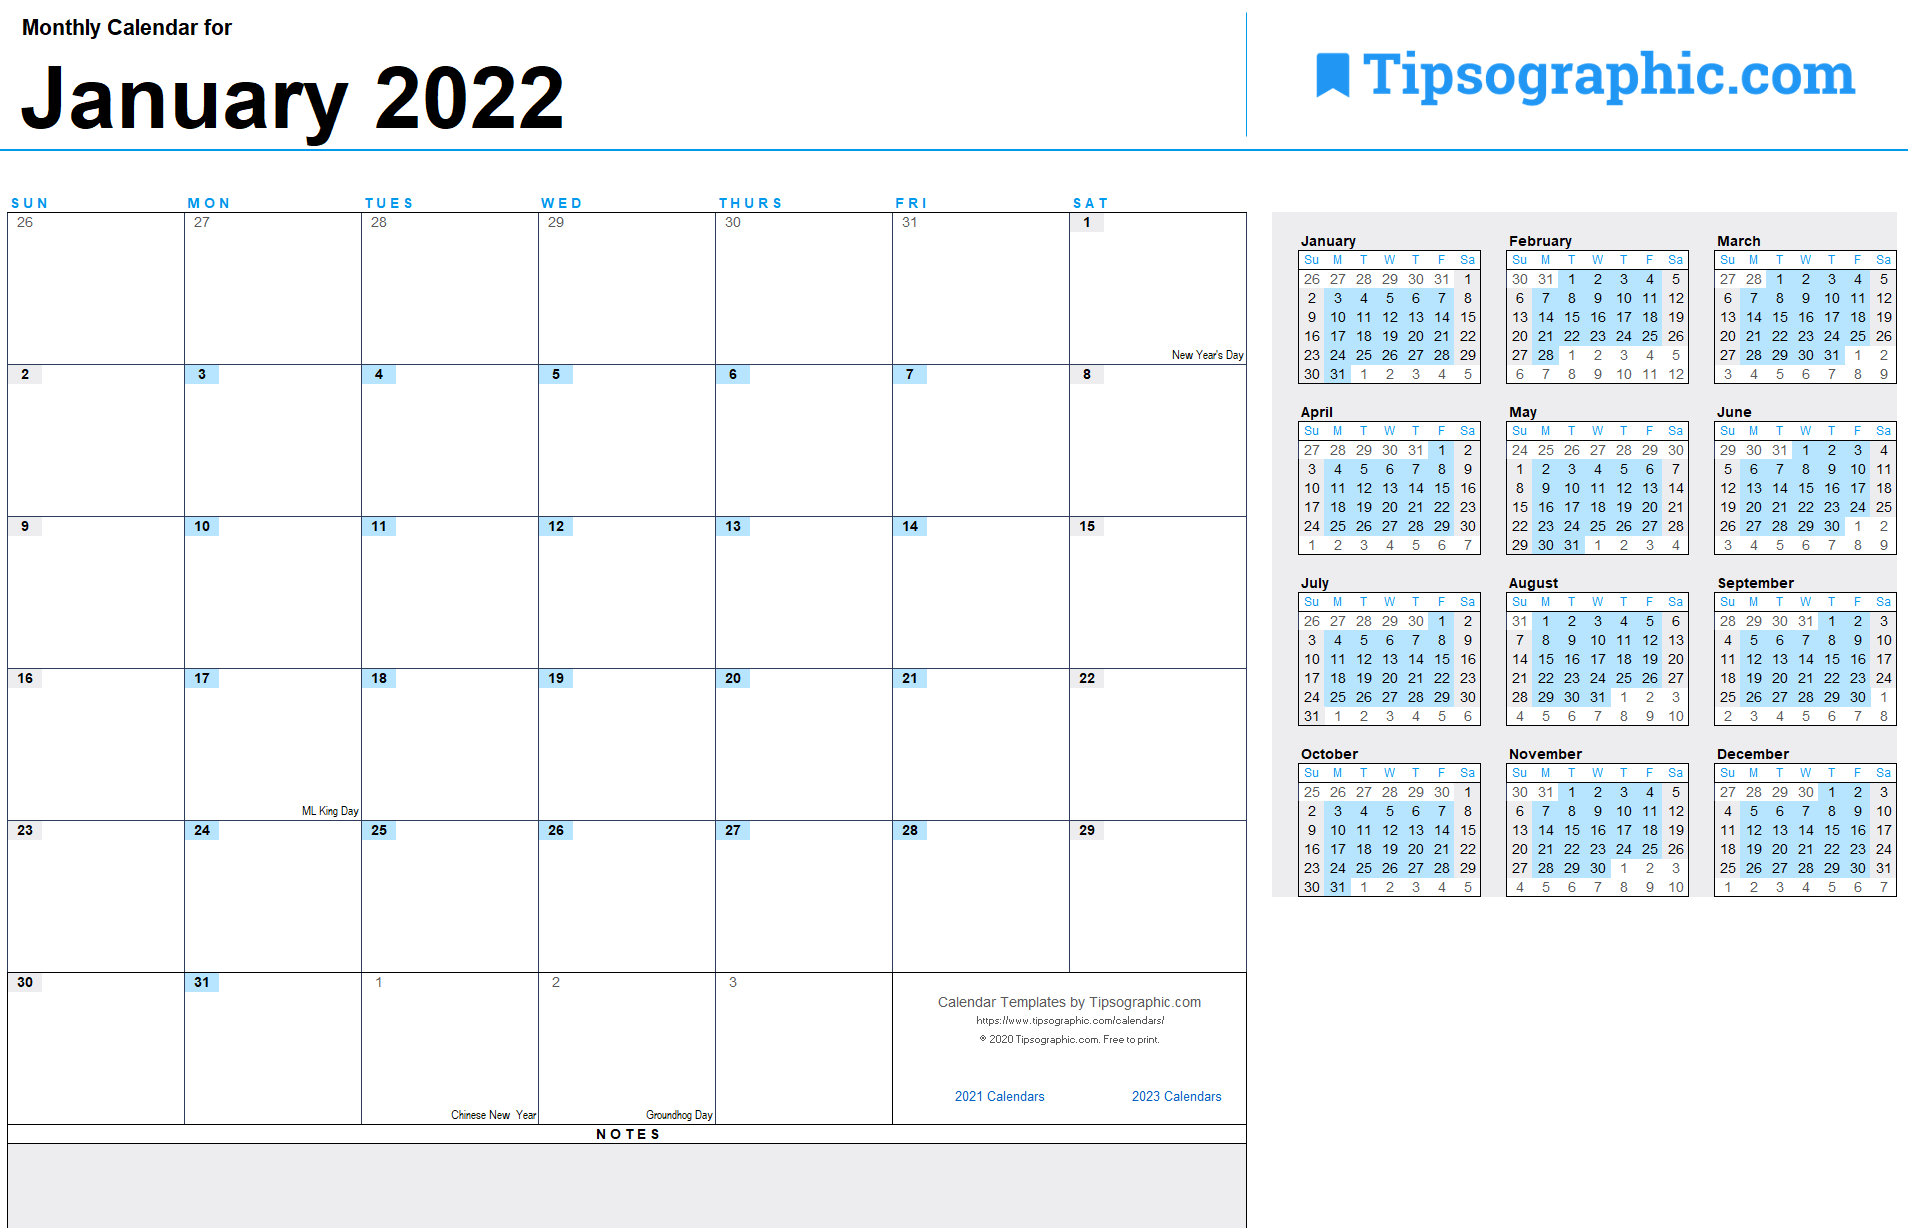 2022 Calendar Templates And Images Tipsographic All In One Photos